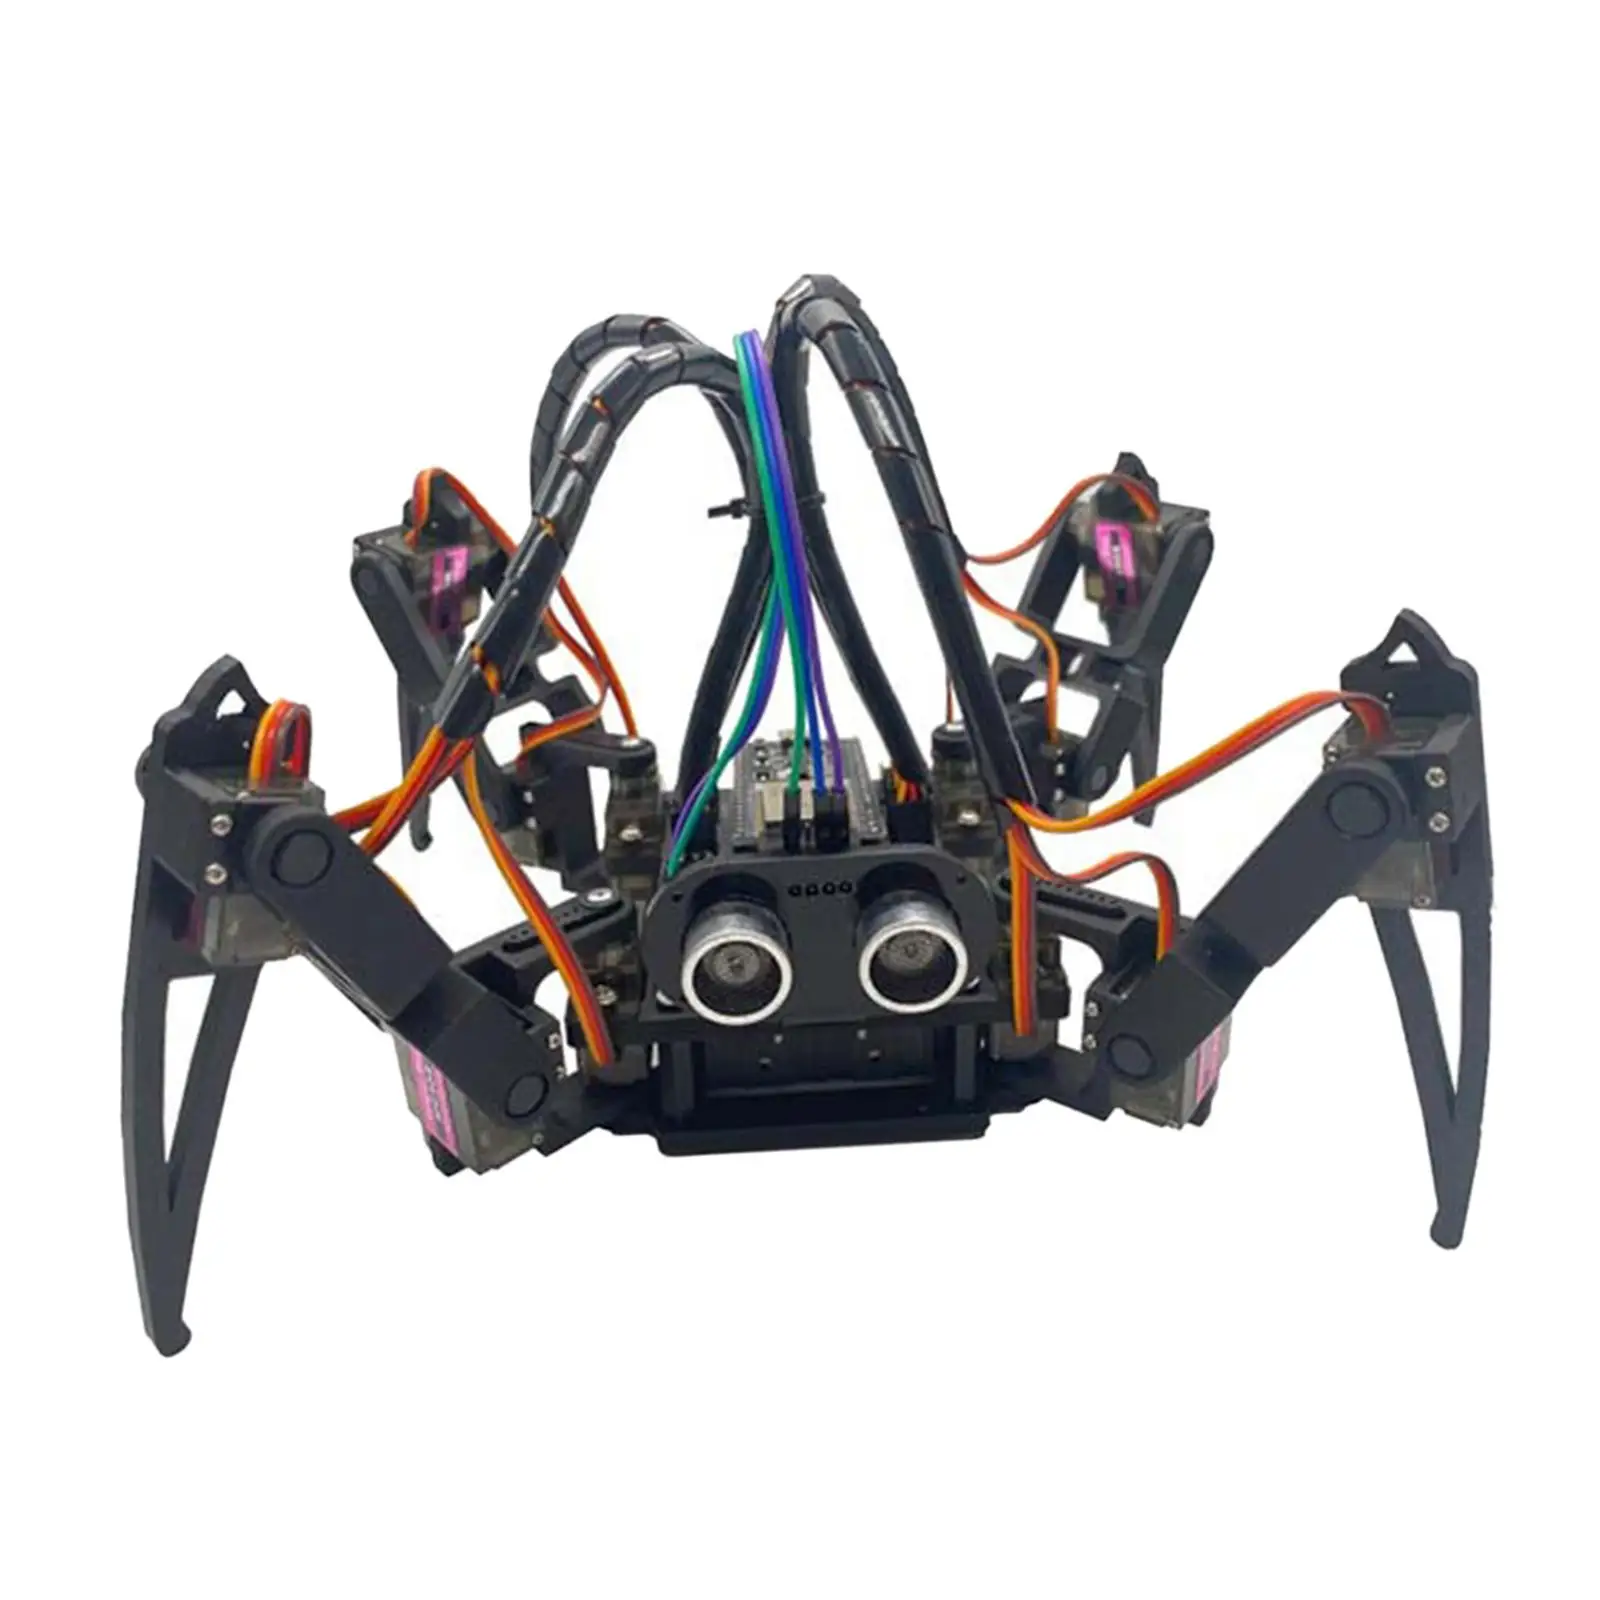 Spider Robot with Comptiable Ardui Driving Board DIY Kits Bionic Quadruped Spider Robot Stem Crawling Robot for Twisting